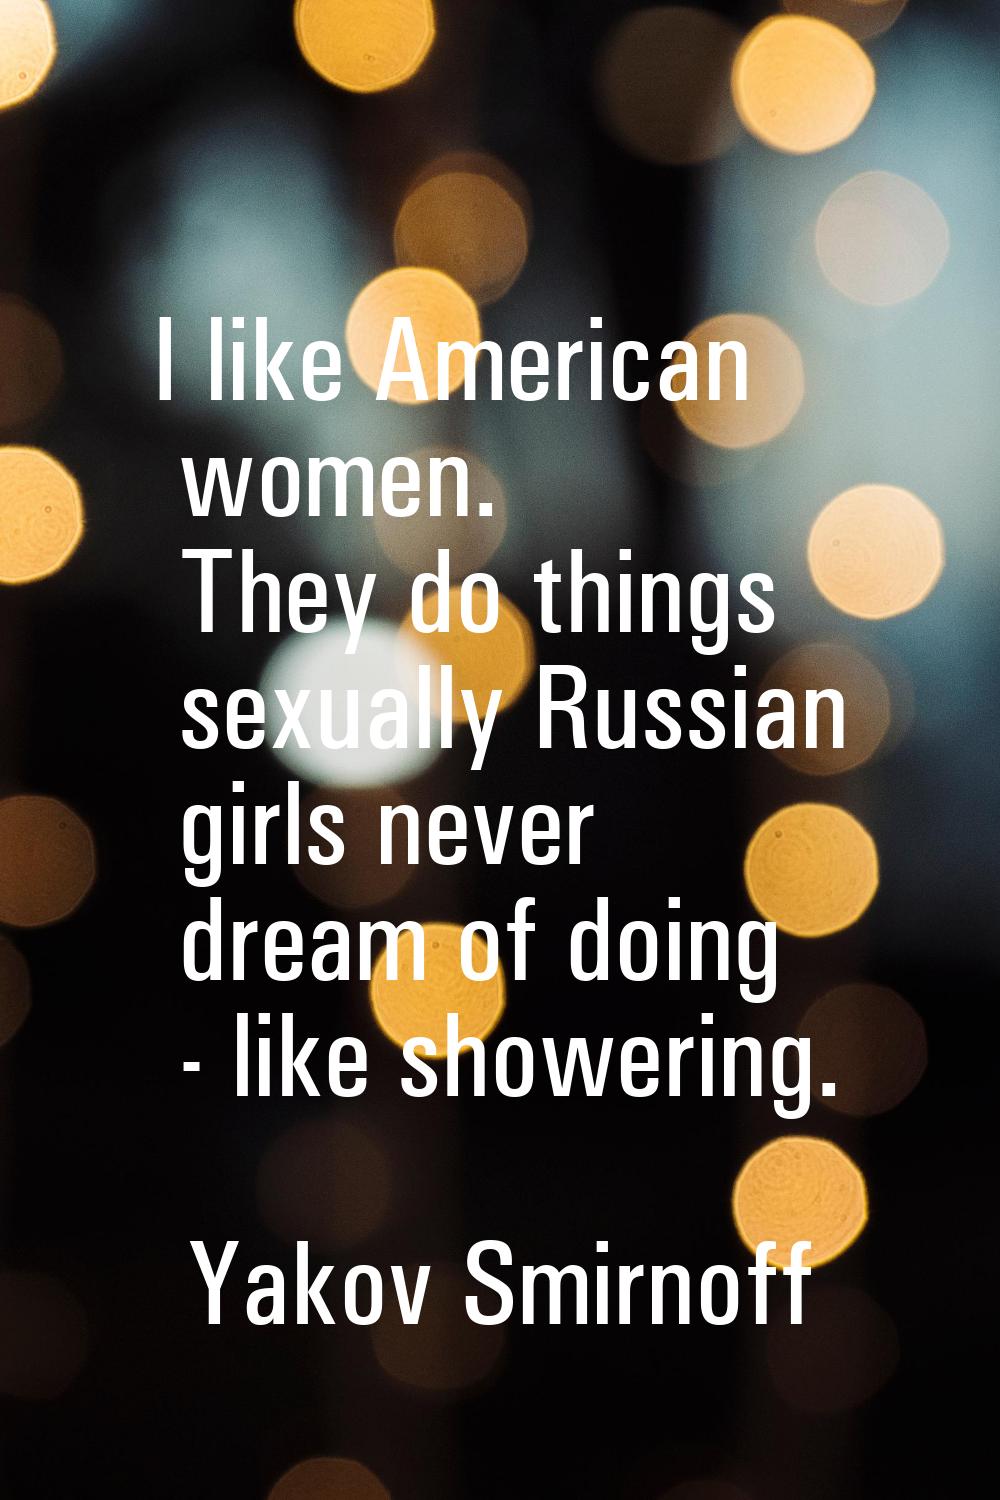 I like American women. They do things sexually Russian girls never dream of doing - like showering.